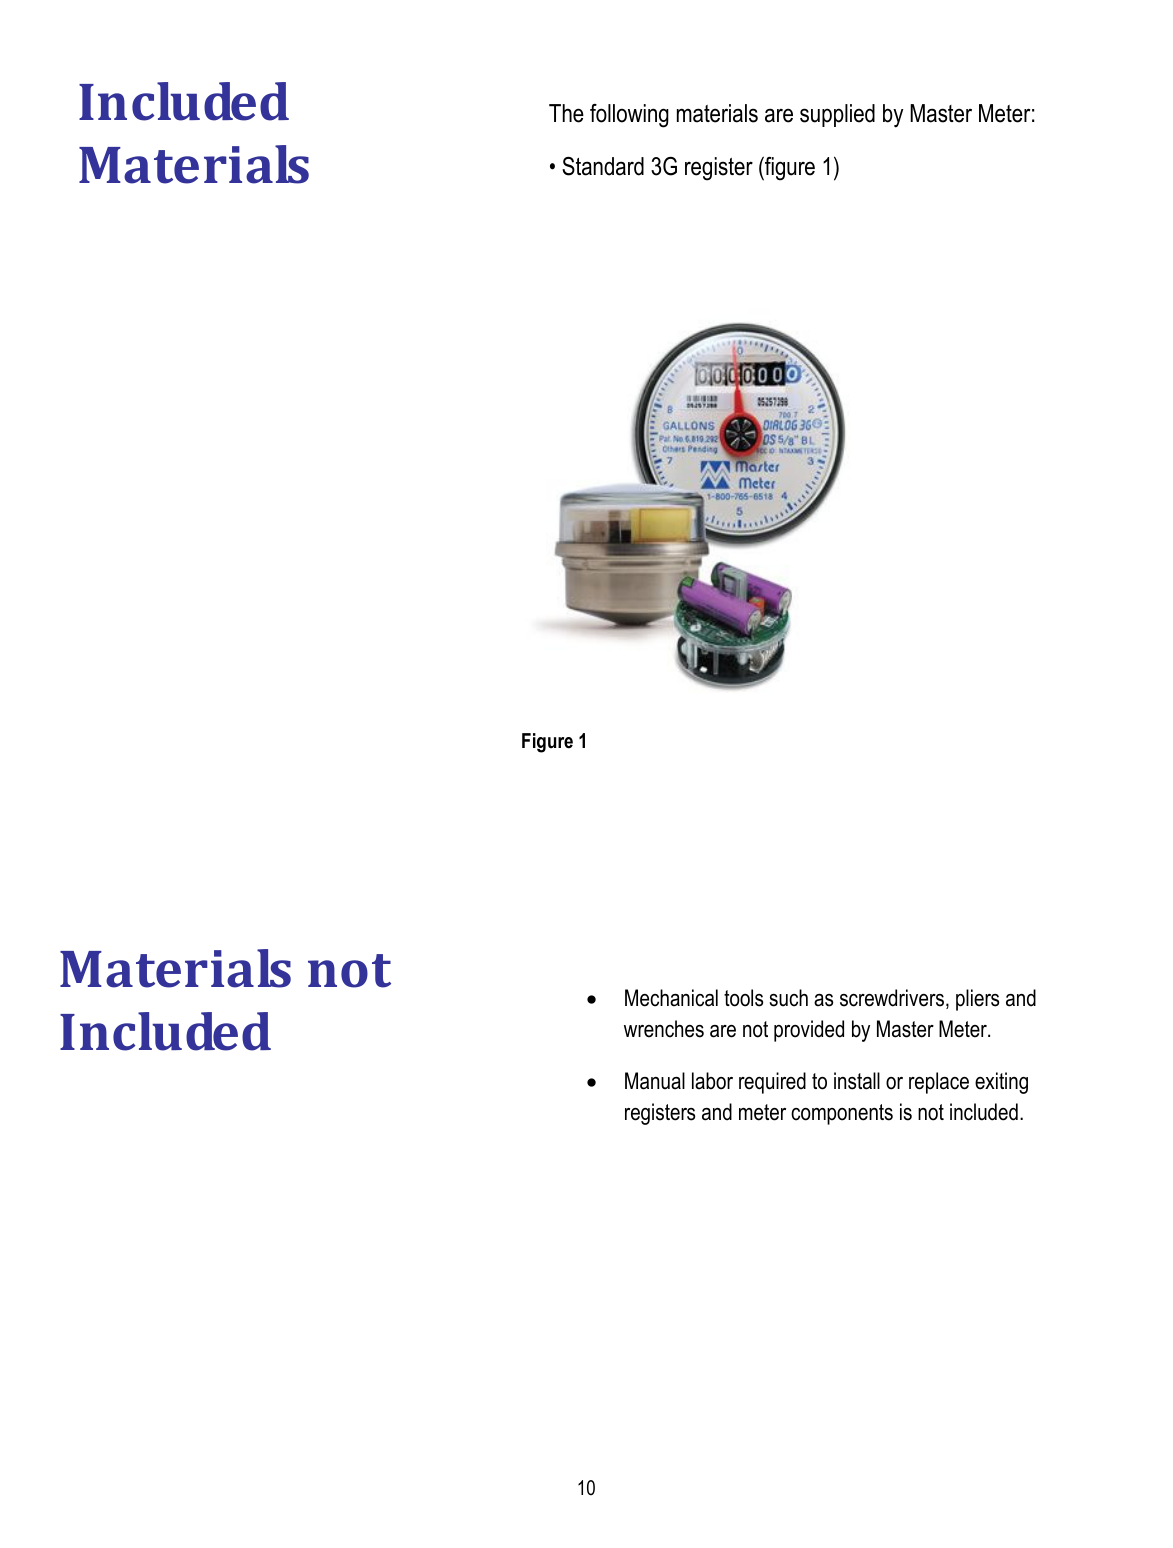  10  The following materials are supplied by Master Meter: • Standard 3G register (figure 1)            • Mechanical tools such as screwdrivers, pliers and wrenches are not provided by Master Meter.  • Manual labor required to install or replace exiting registers and meter components is not included. Included Materials Figure 1 Materials not Included 